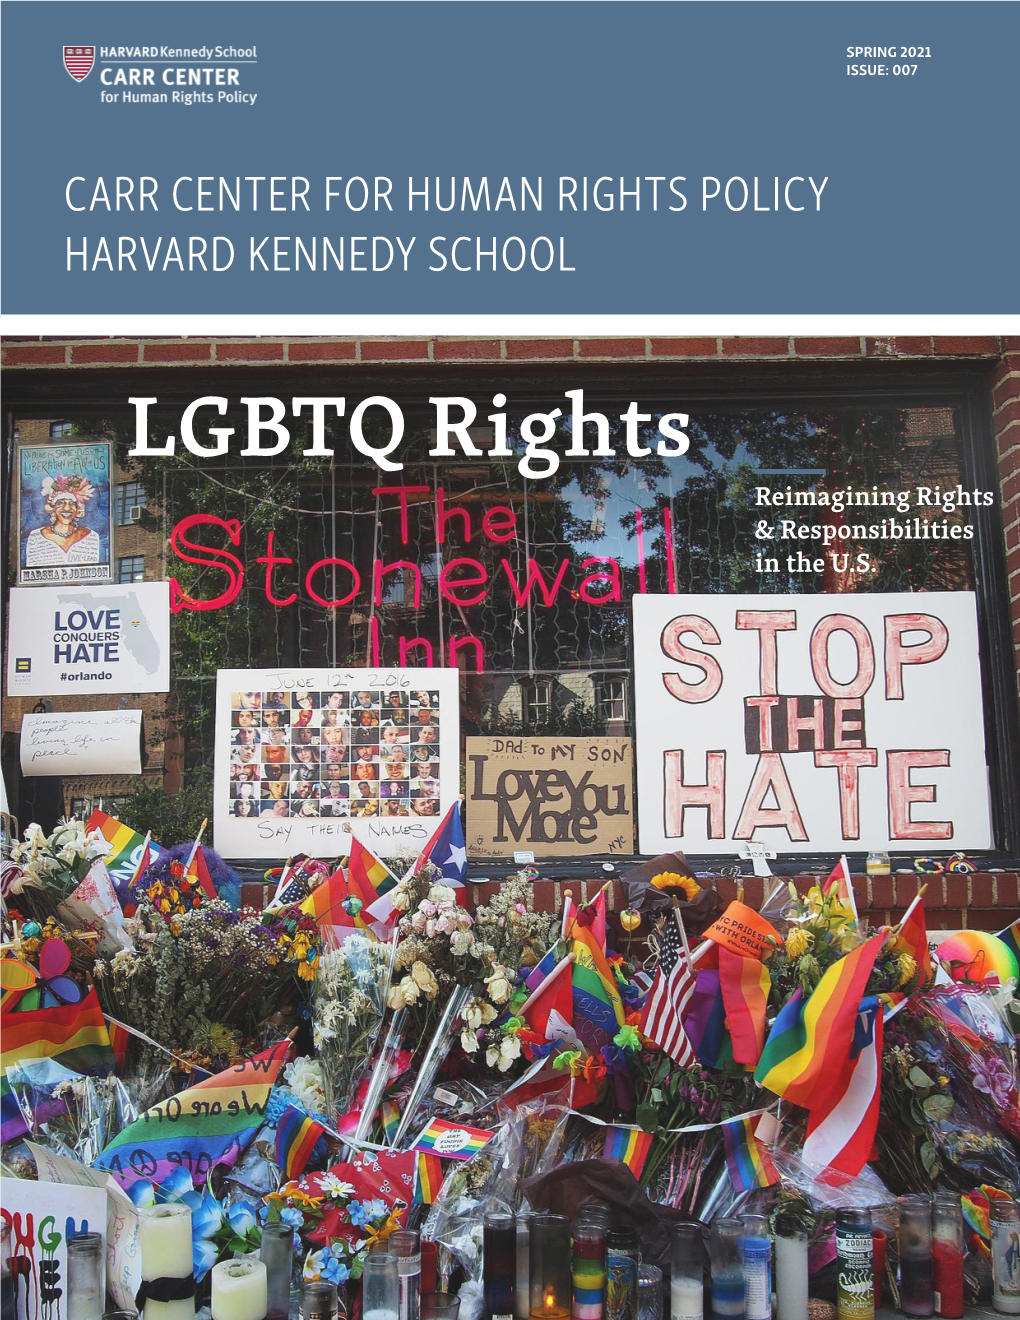 LGBTQ Rights Reimagining Rights & Responsibilities in the U.S